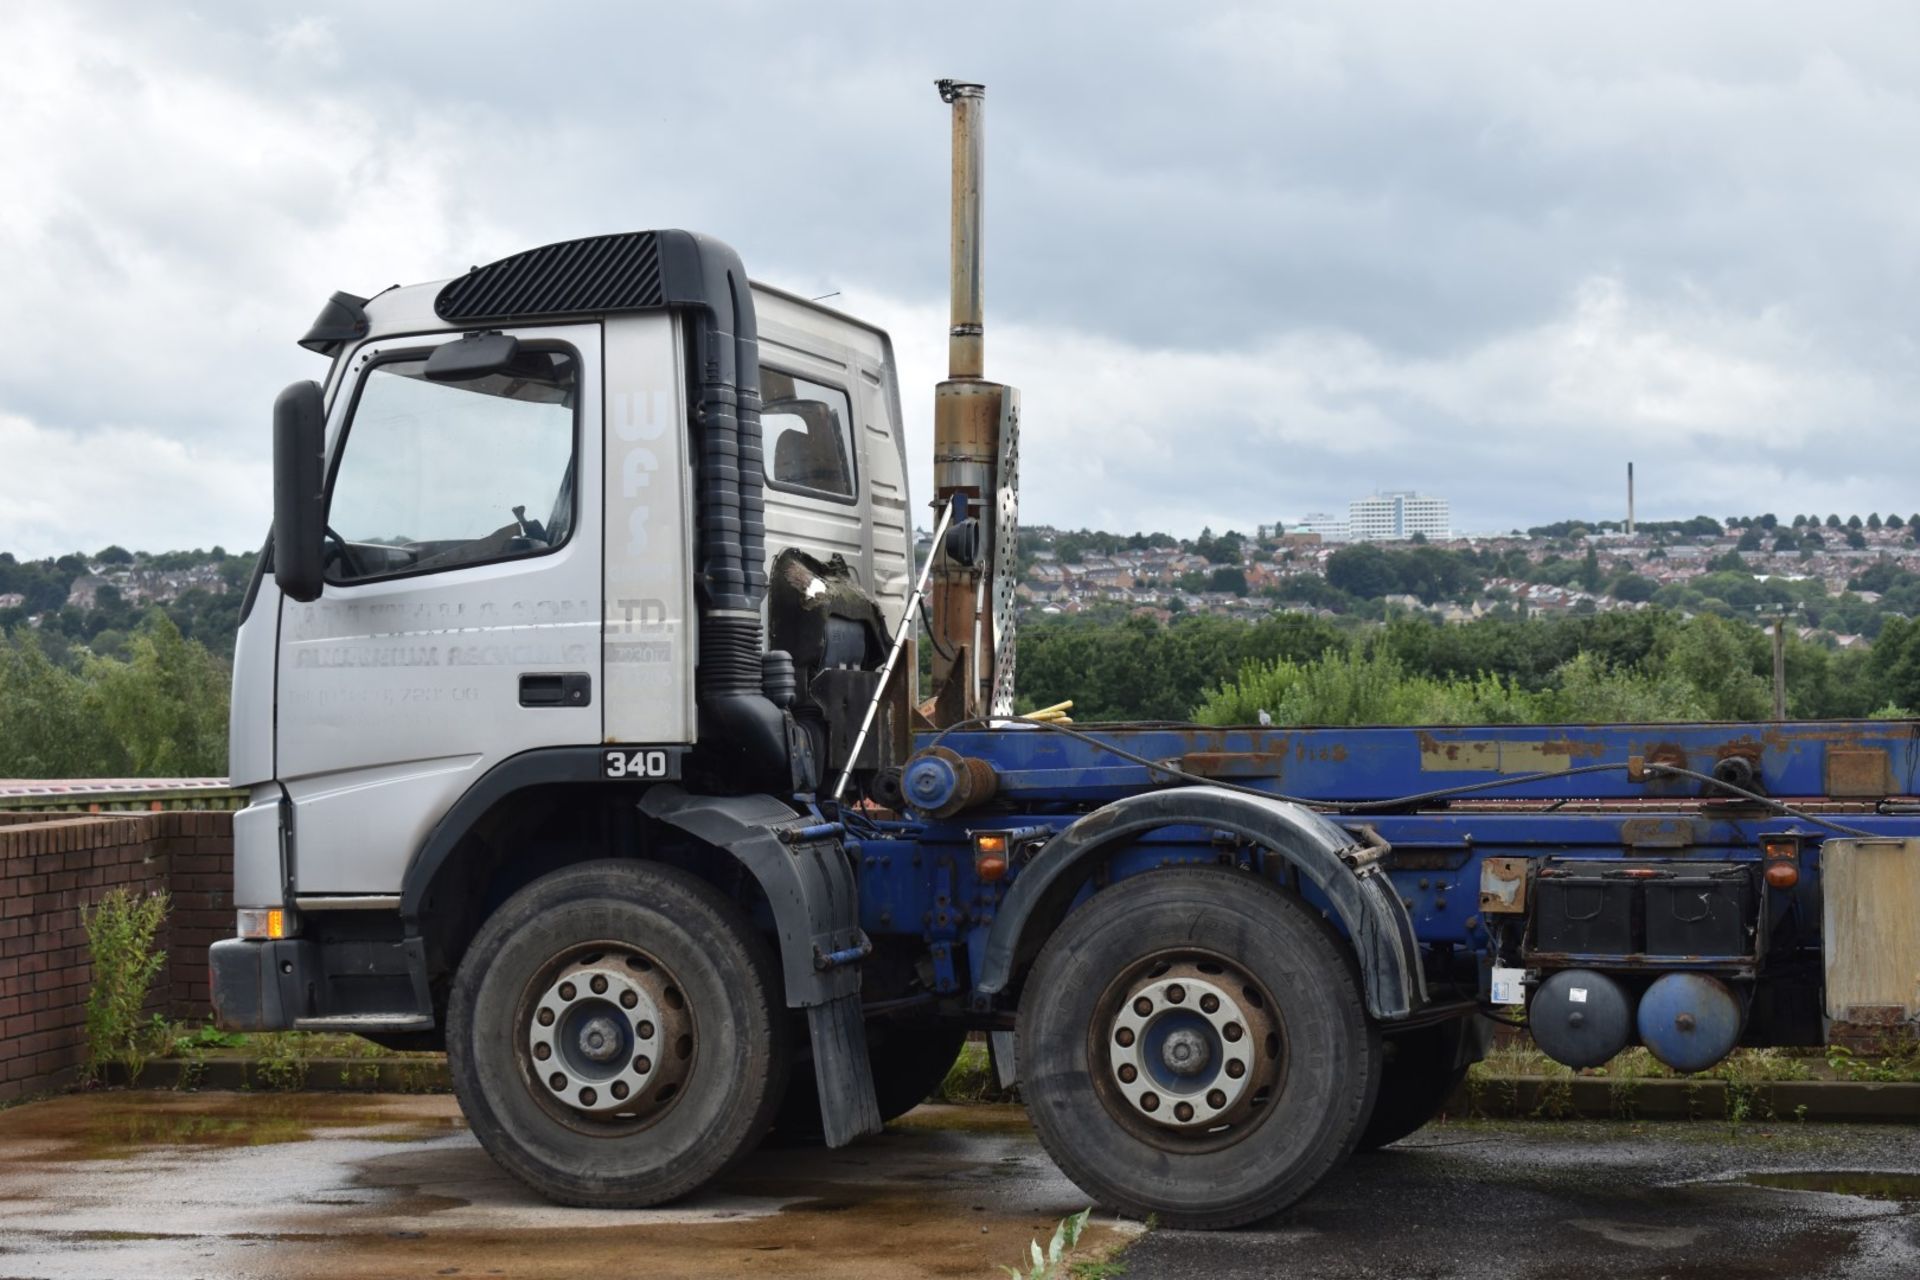 1 x Volvo 340 Plant Lorry With Tipper Chasis and Fitted Winch - CL547 - Location: South Yorkshire. - Image 5 of 25